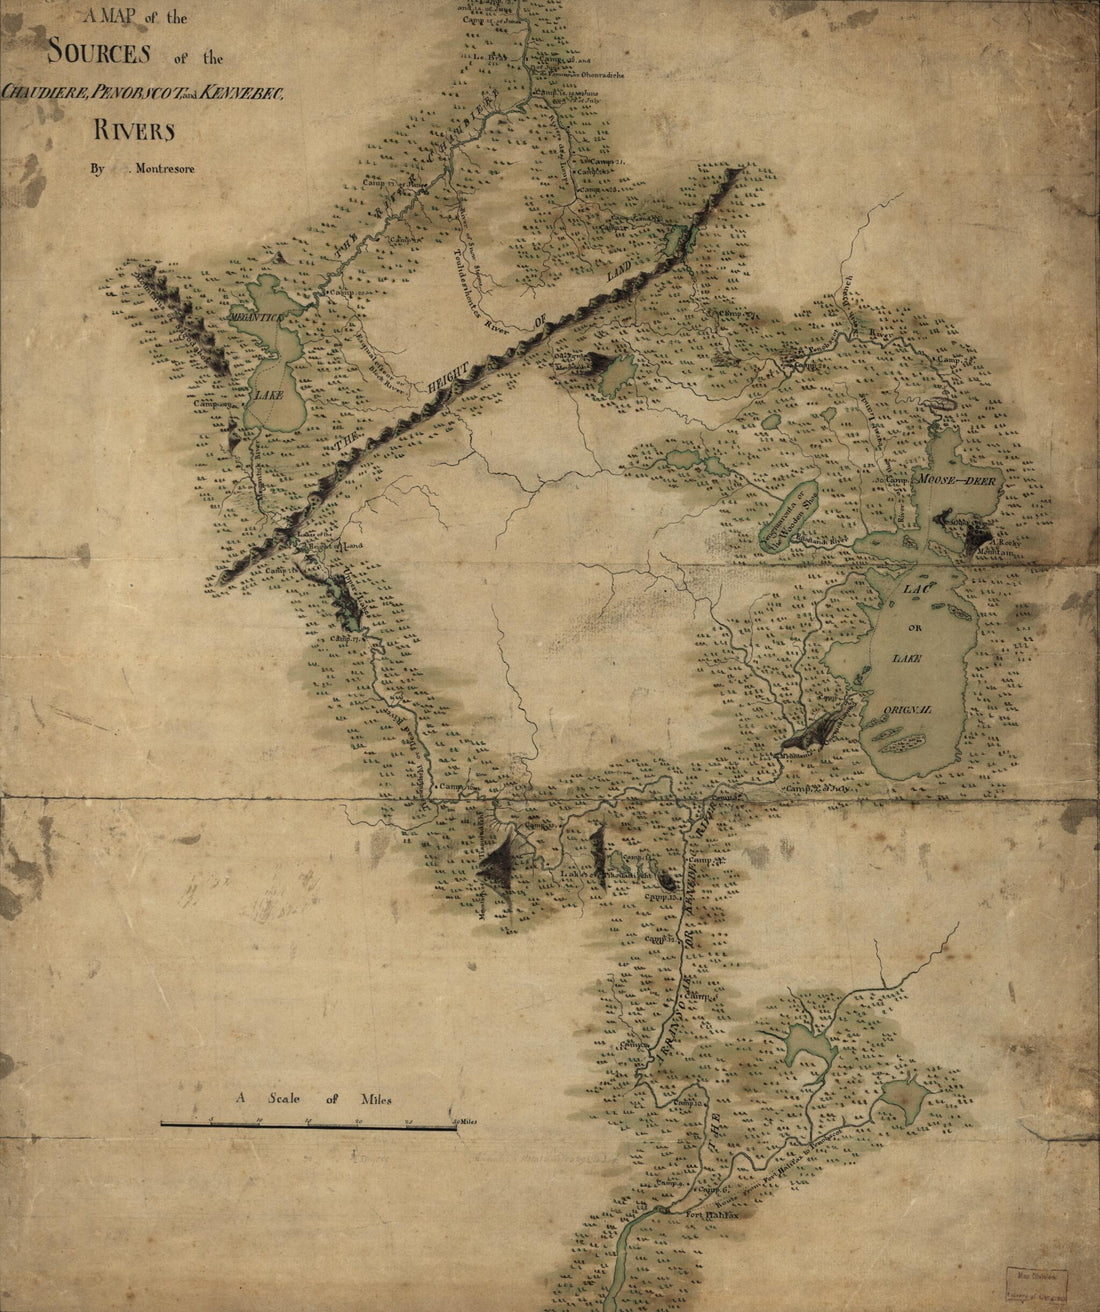 This old map of A Map of the Sources of the Chaudière, Penobscot, and Kennebec Rivers from 1761 was created by John Montrésor in 1761